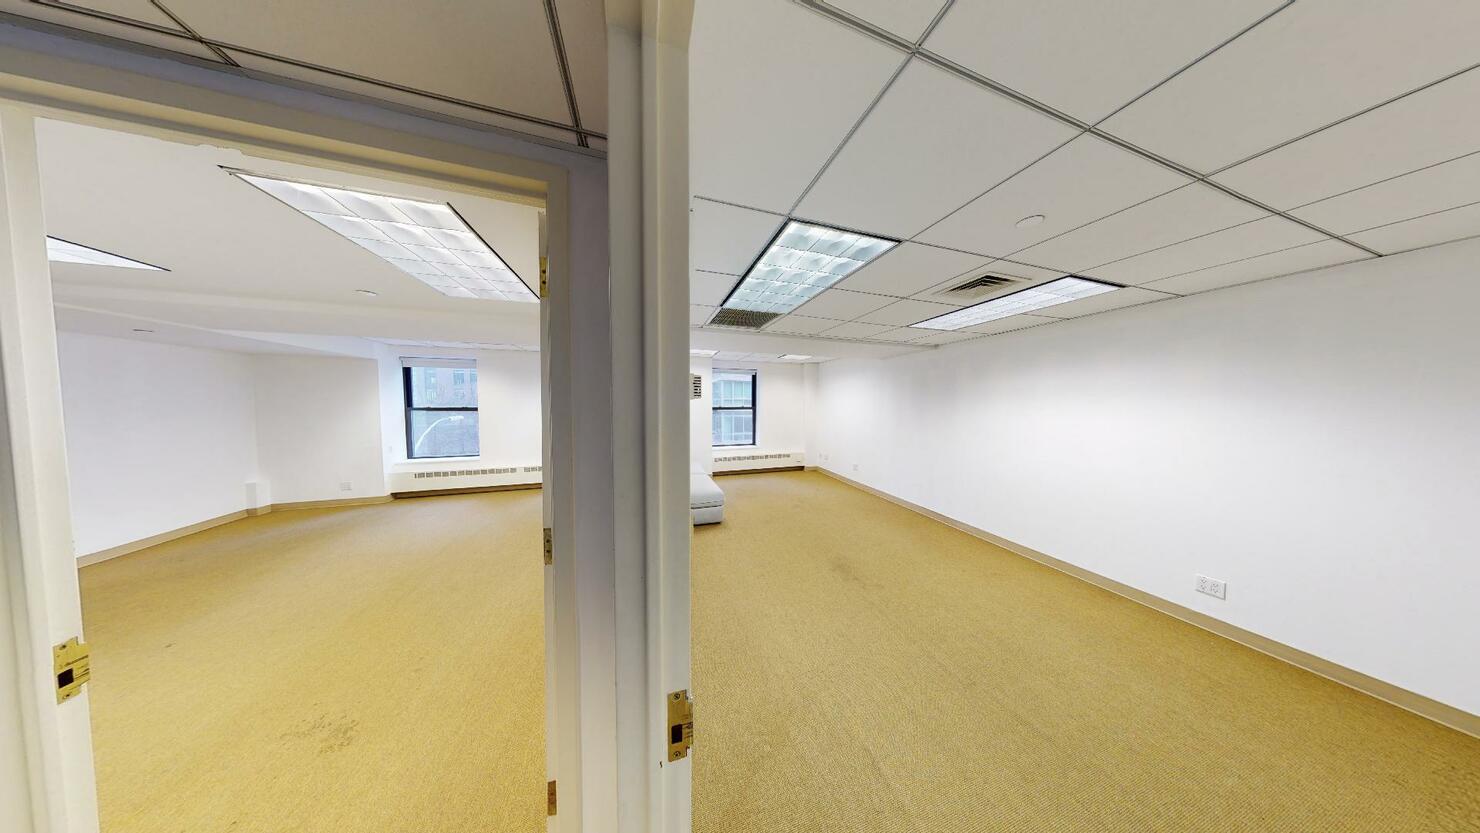 Bright 1,510 SF office space for lease on Tenth Avenue, New York City, including three offices.